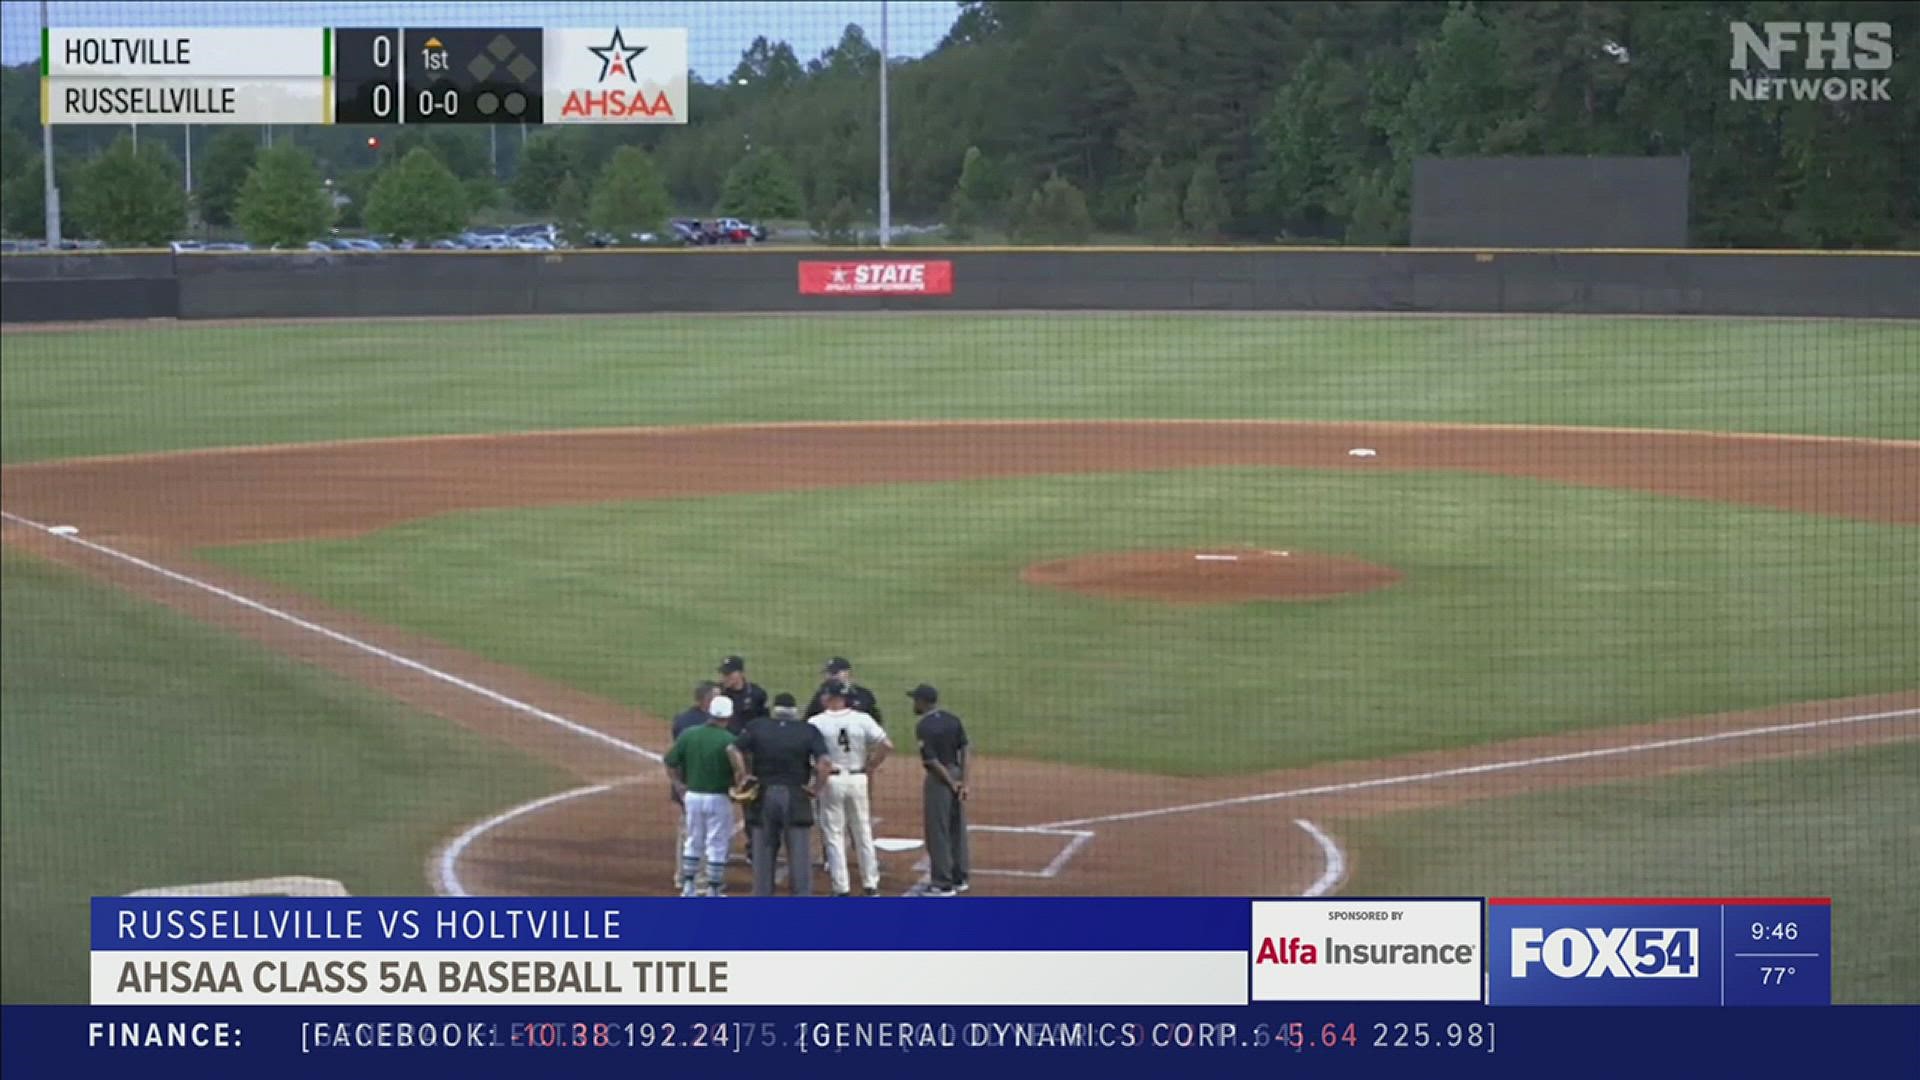 Russellville scores two late inning runs to capture a 2-0 victory against Holtville in the 2022 Class 5A Baseball Championship series.